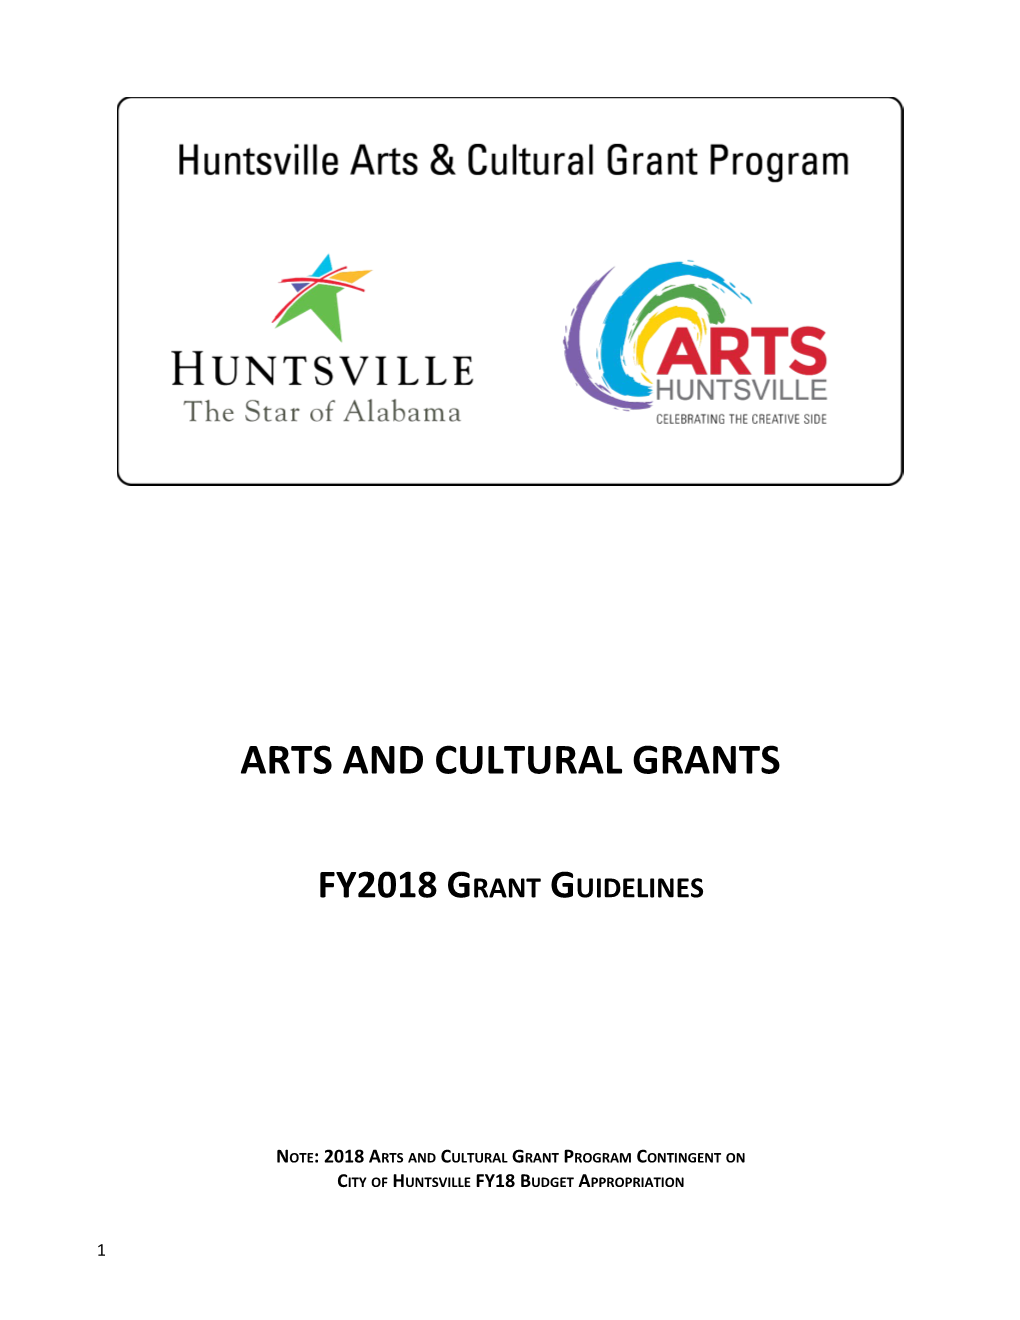 Note: 2018 Arts and Cultural Grant Program Contingent On